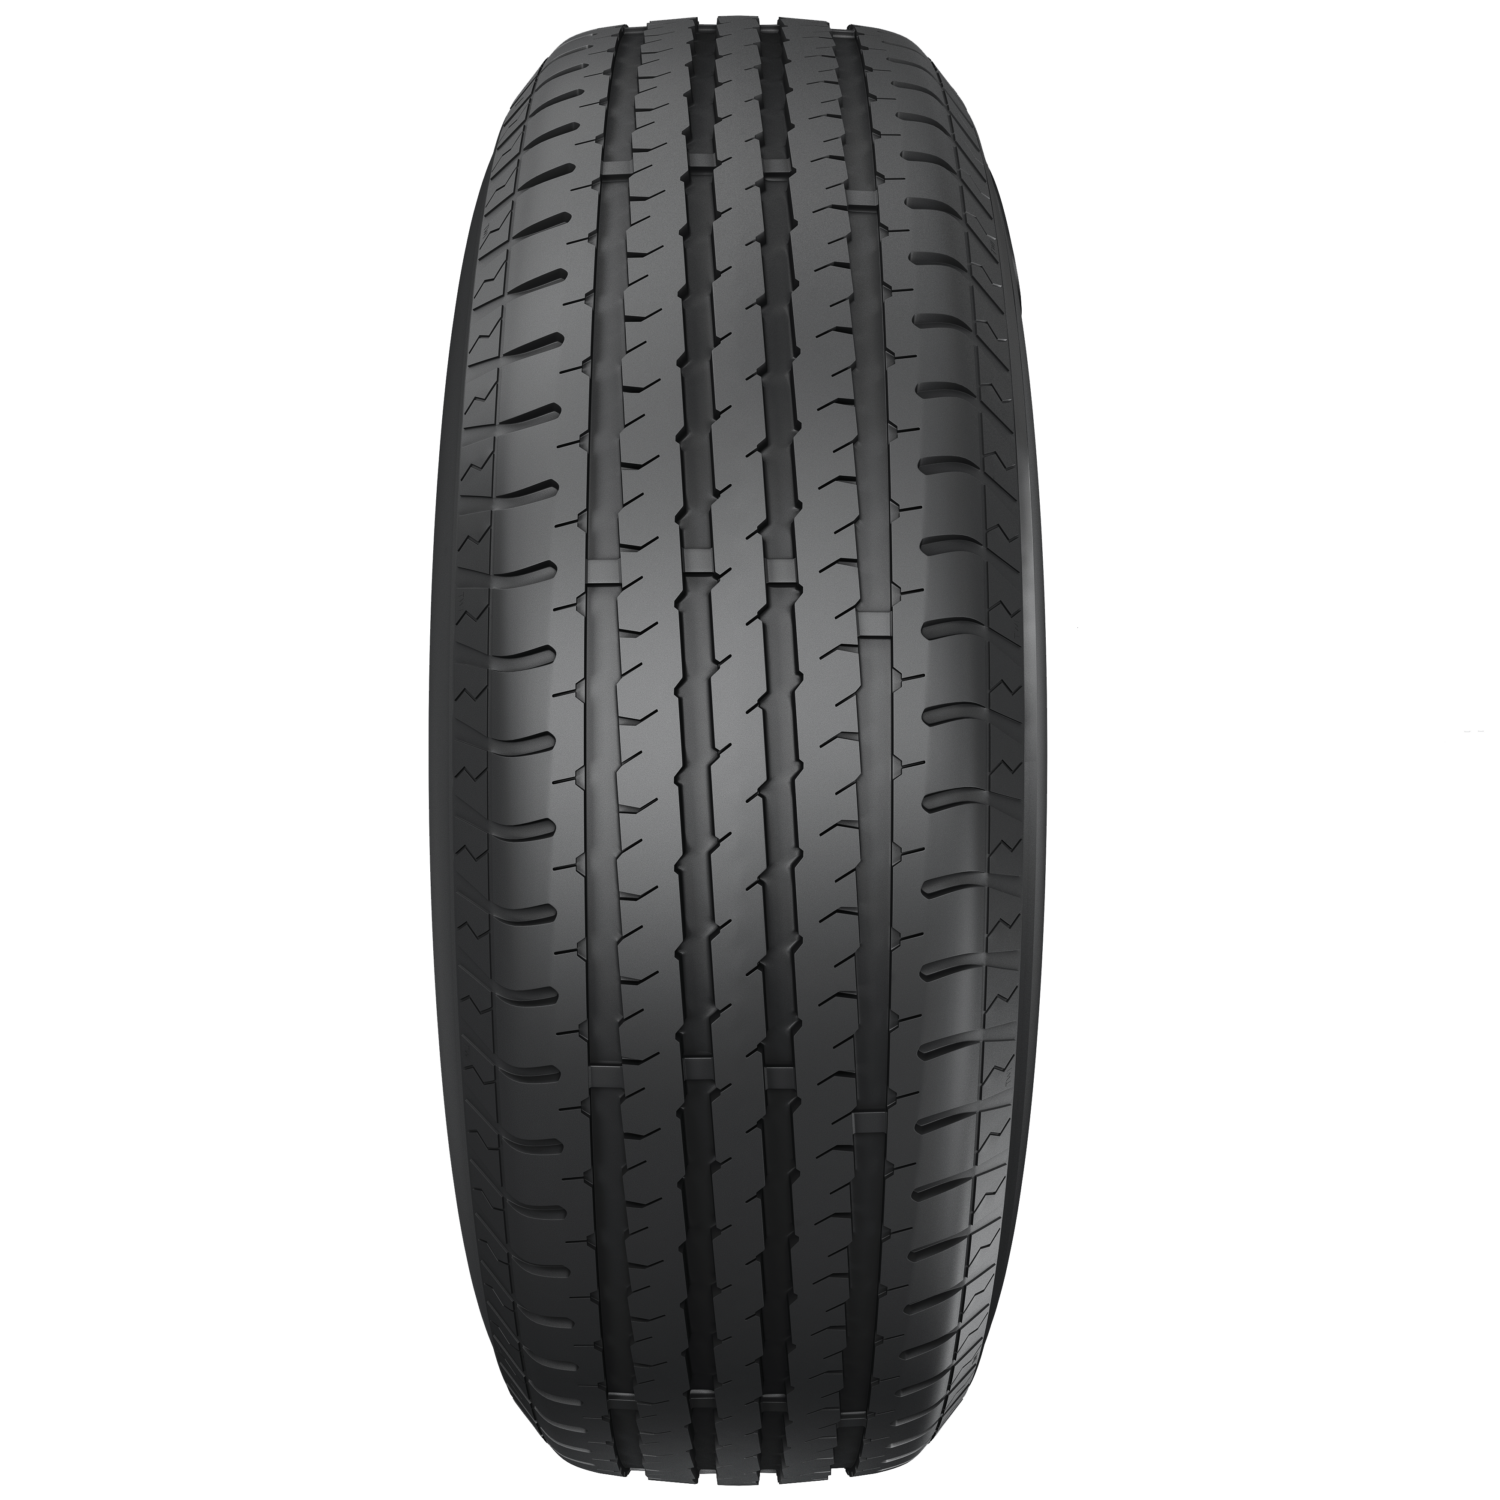 ST01, Fortune Tire USA